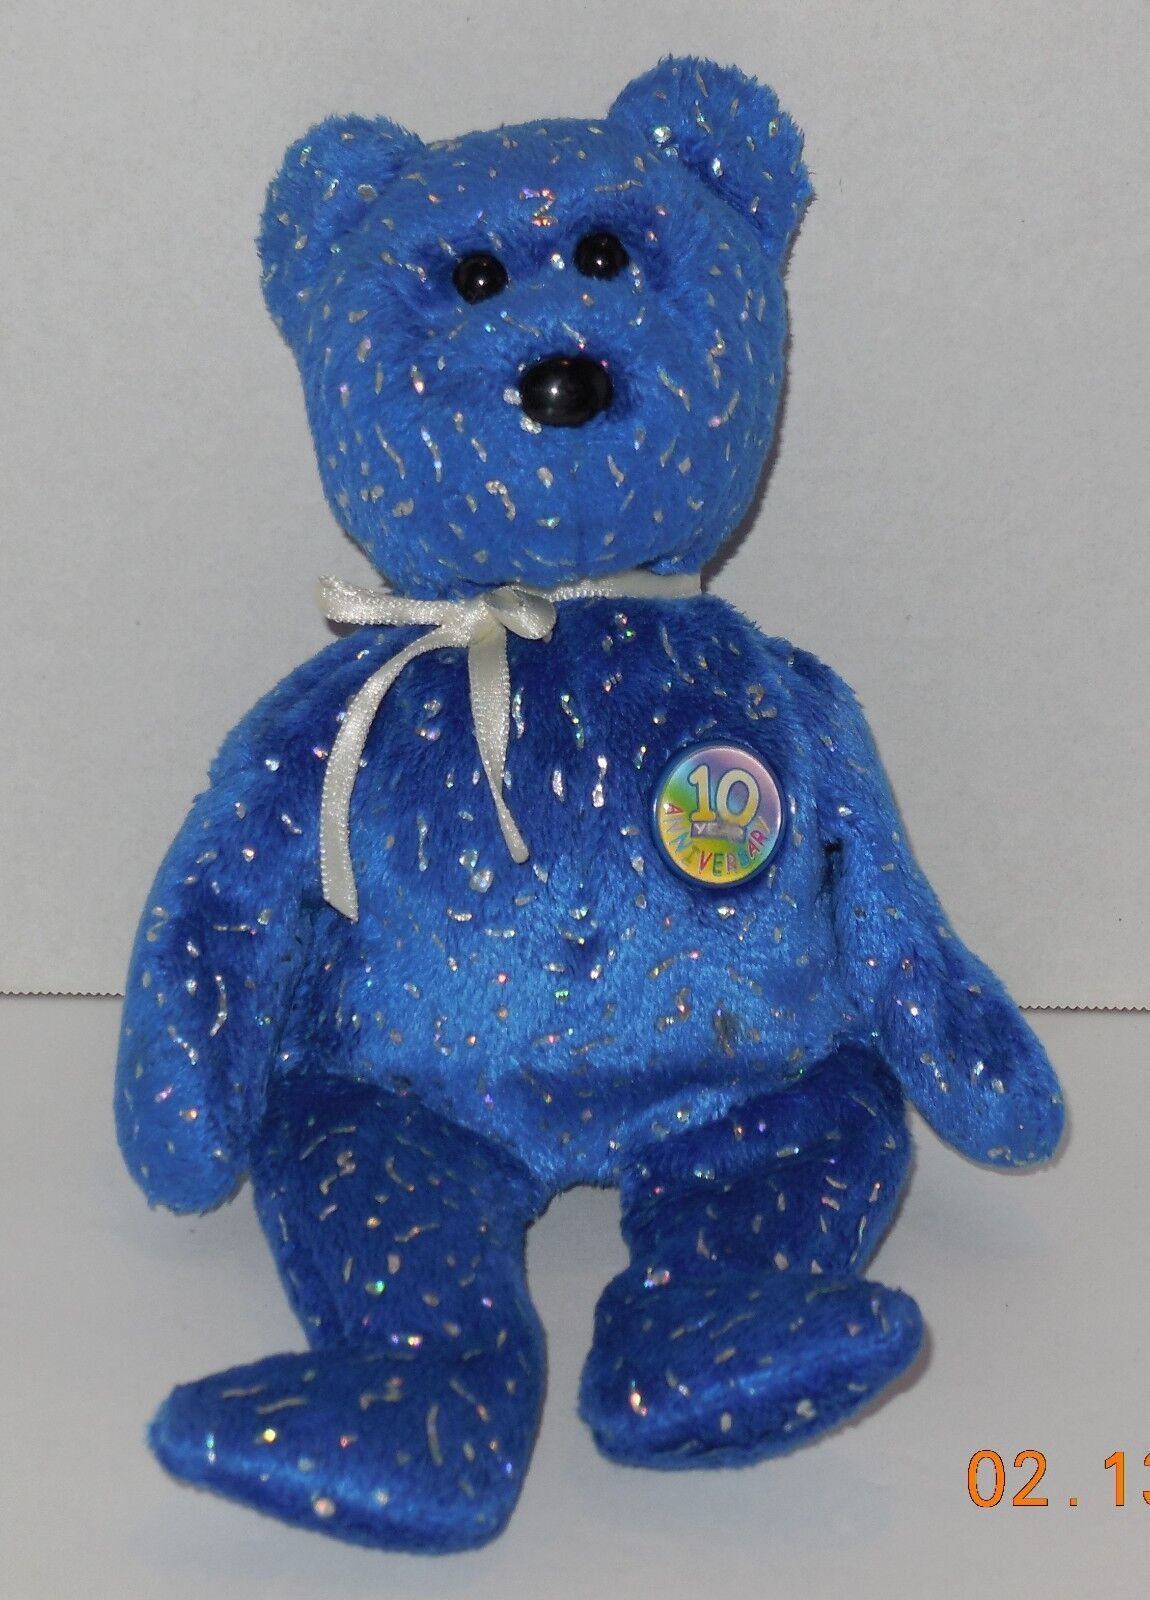 Primary image for TY DECADE The Bear 10th Anniversary Beanie Baby plush toy